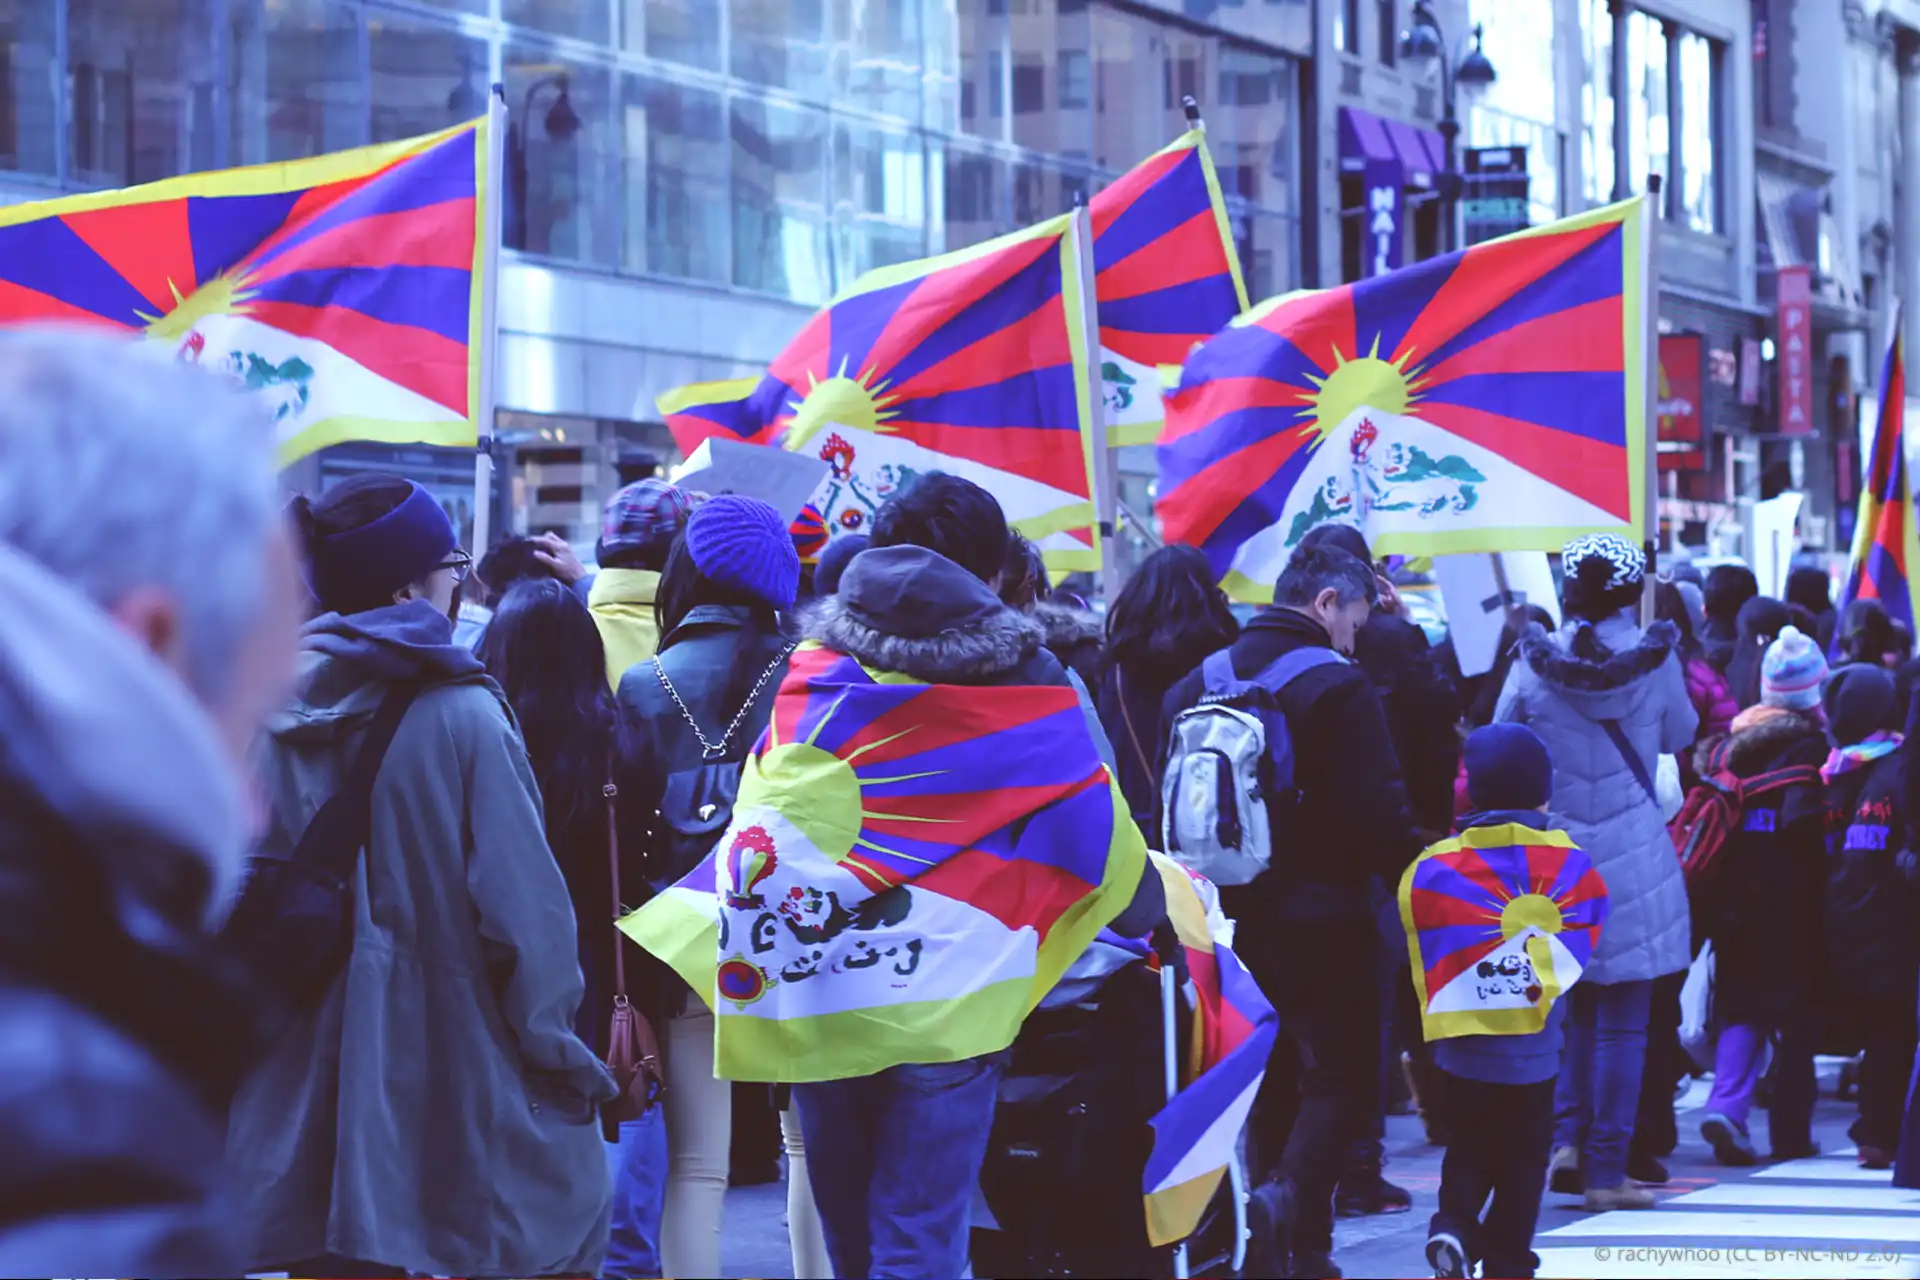 Behind the Courtroom - Cultural Genocide on Tibet, East Turkestan and Hong Kong